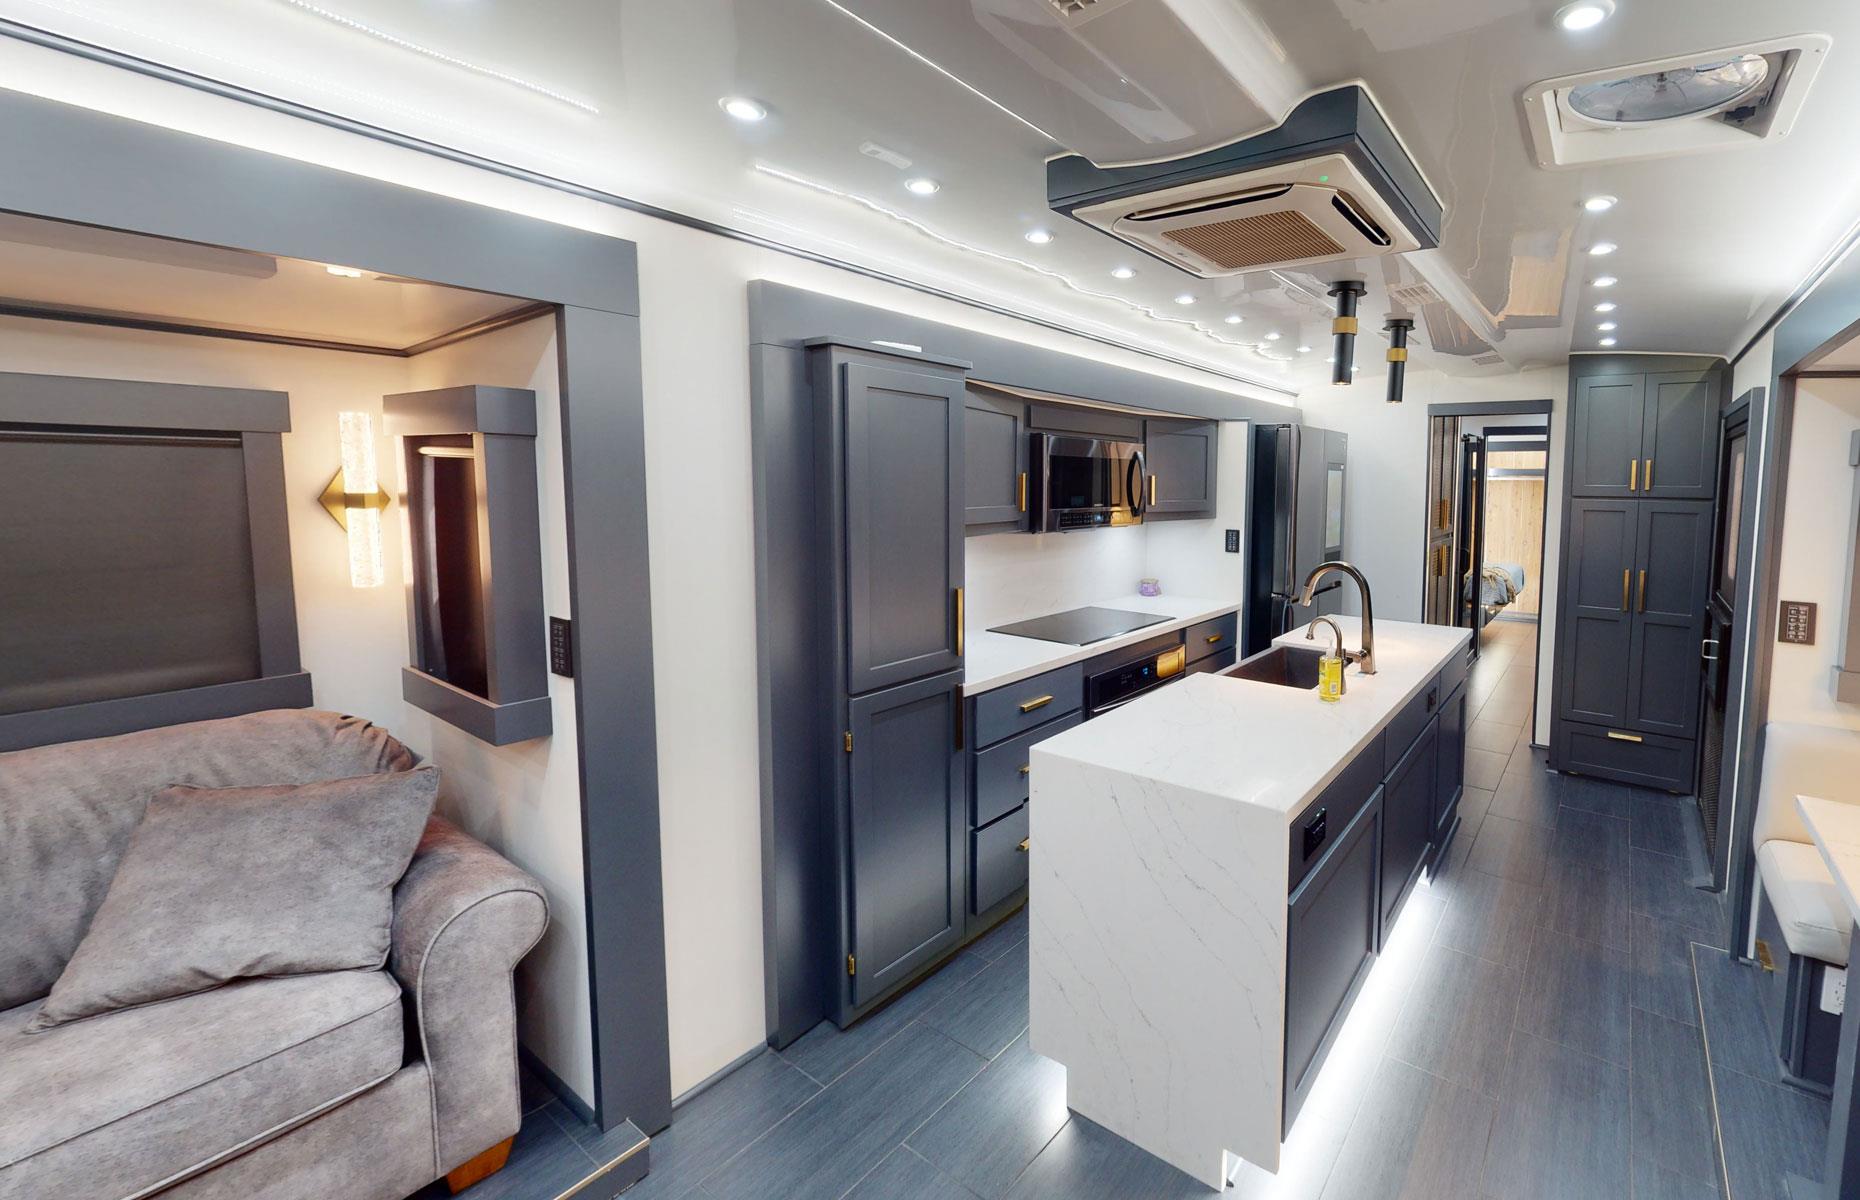 <p>As you can see from this photo of a typical custom trailer from the company, the décor is simple and elegant, with a smart, traditional feel.</p>  <p>Space is cleverly used and quality fixtures and fittings add to the high-spec finish. The living area flows well and is a cut above the sort of interior you'd expect to find in an RV. </p>  <p>In this particular model, the sleek kitchen features beautiful dark cabinetry with gold-hued hardware and even a stunning marble-topped preparation island. </p>